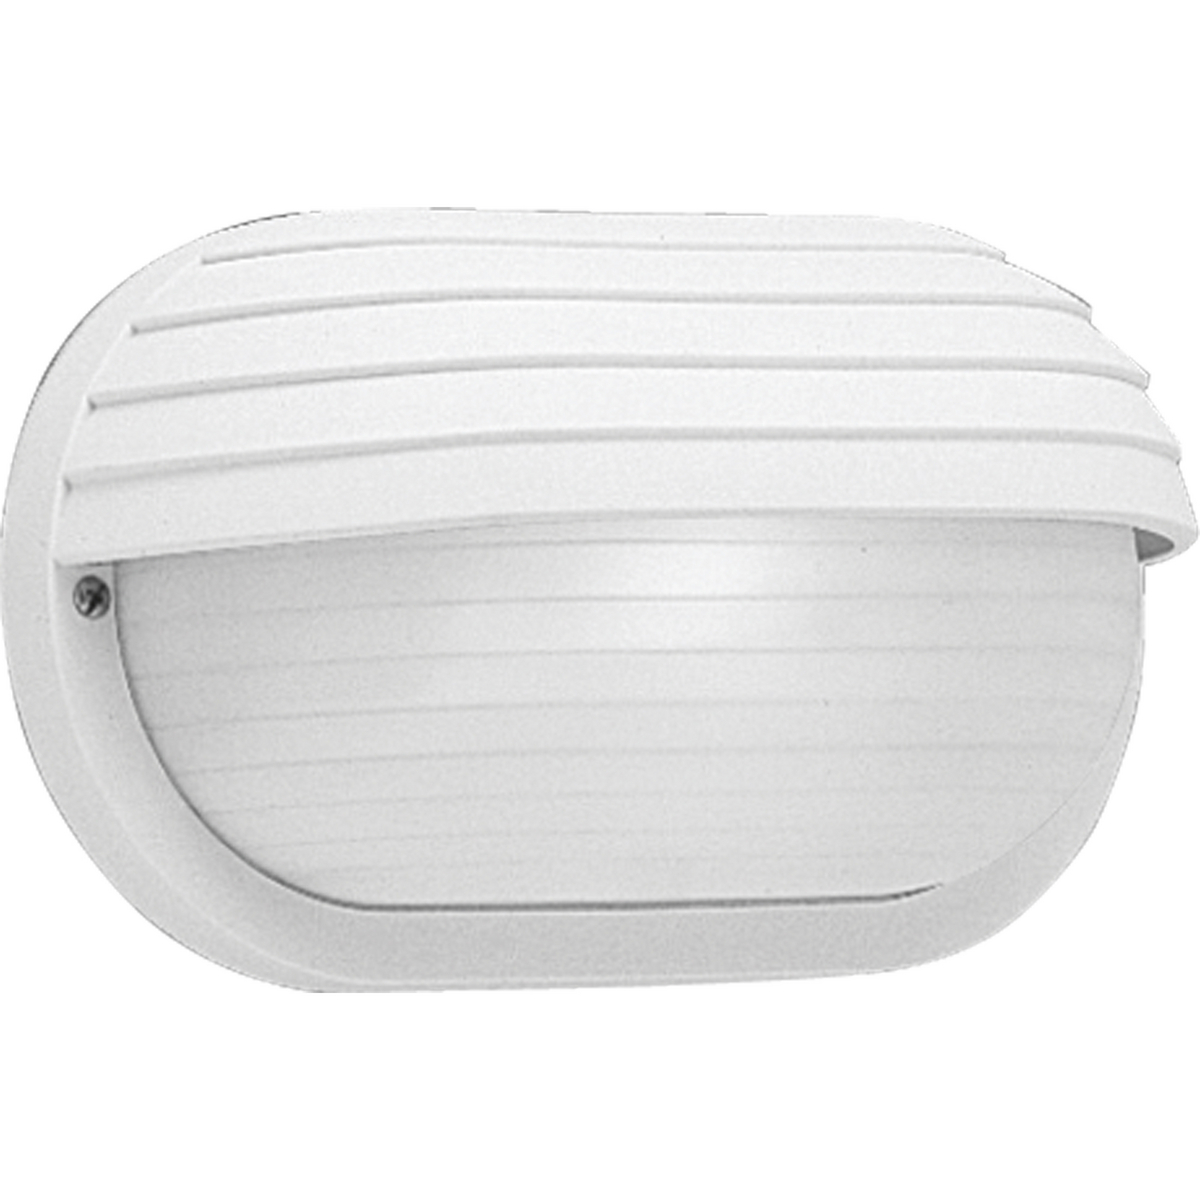 One-Light 10-1/2 in Wall or Ceiling Mount Bulkhead. Polycarbonate light for indoor and outdoor areas. Colors will not fade and parts will not corrode. UV stabilized. UL listed for wet locations. Wall mount only. White finish.